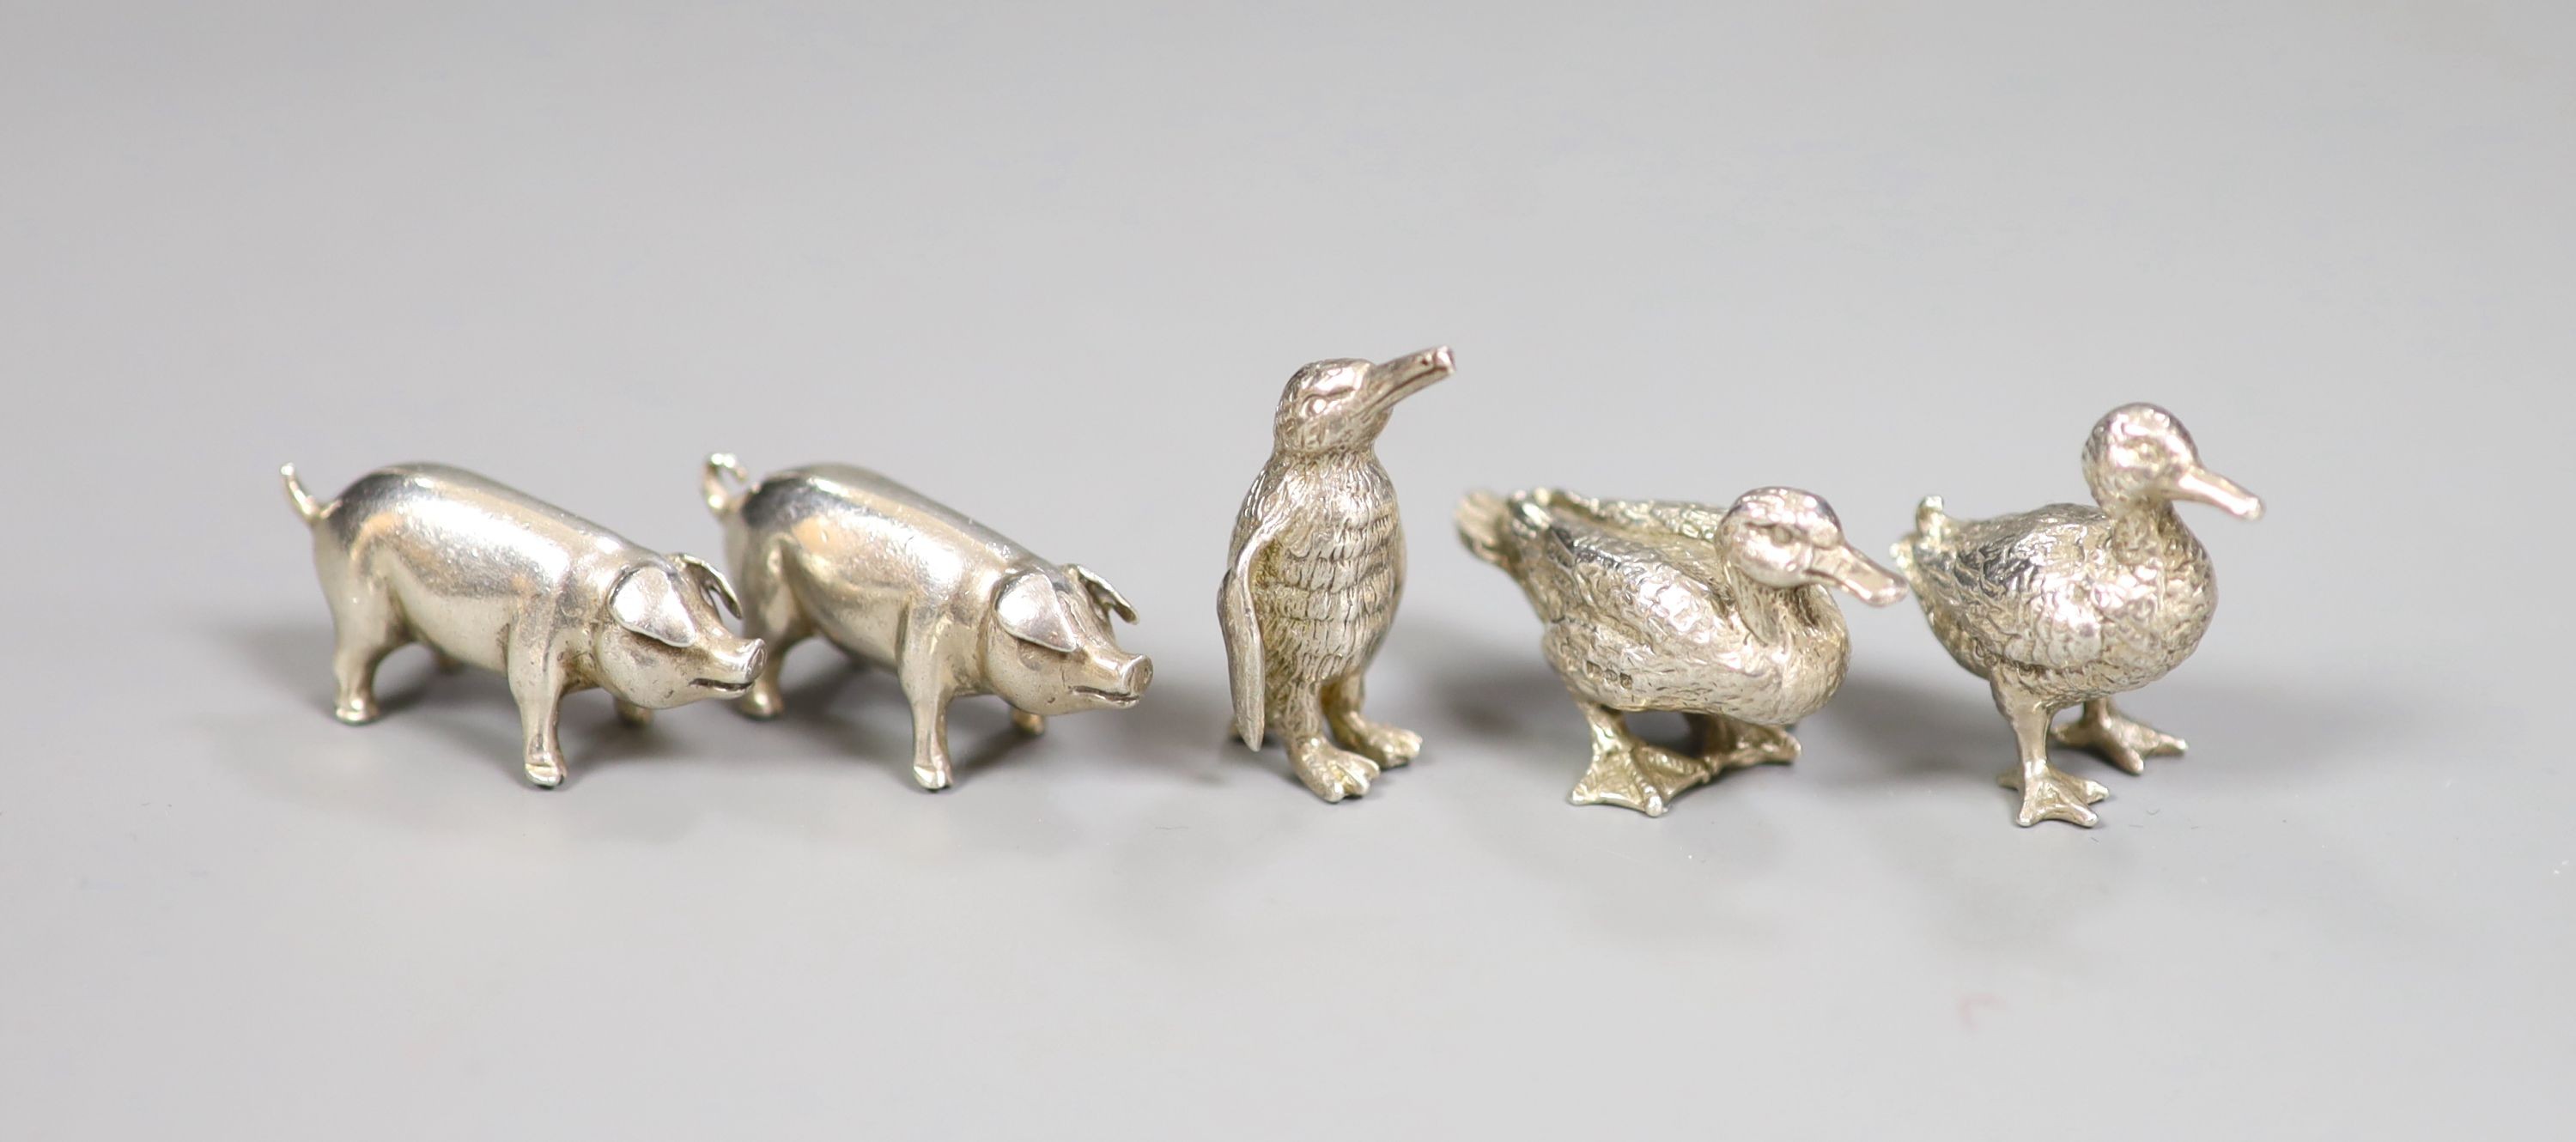 Five modern miniature silver model animals including two pigs by Simon J Beer, London, 1991, two ducks and a penguin, tallest 3cm, 87 grams.